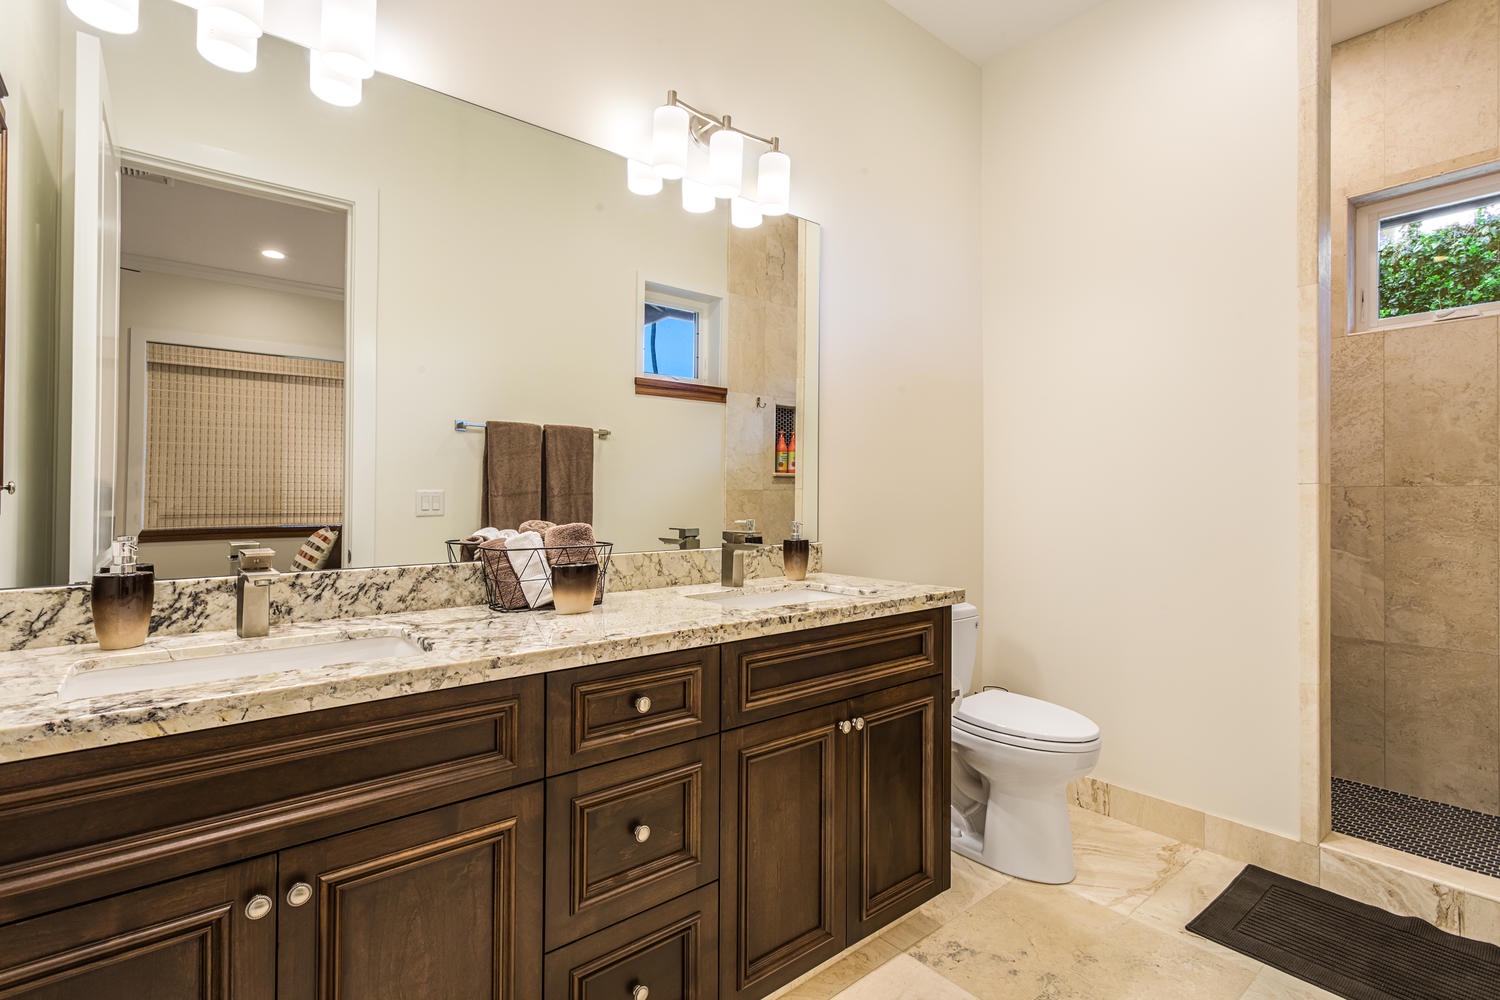 Kailua Kona Vacation Rentals, Ohana le'ale'a - Second primary ensuite with dual vanity